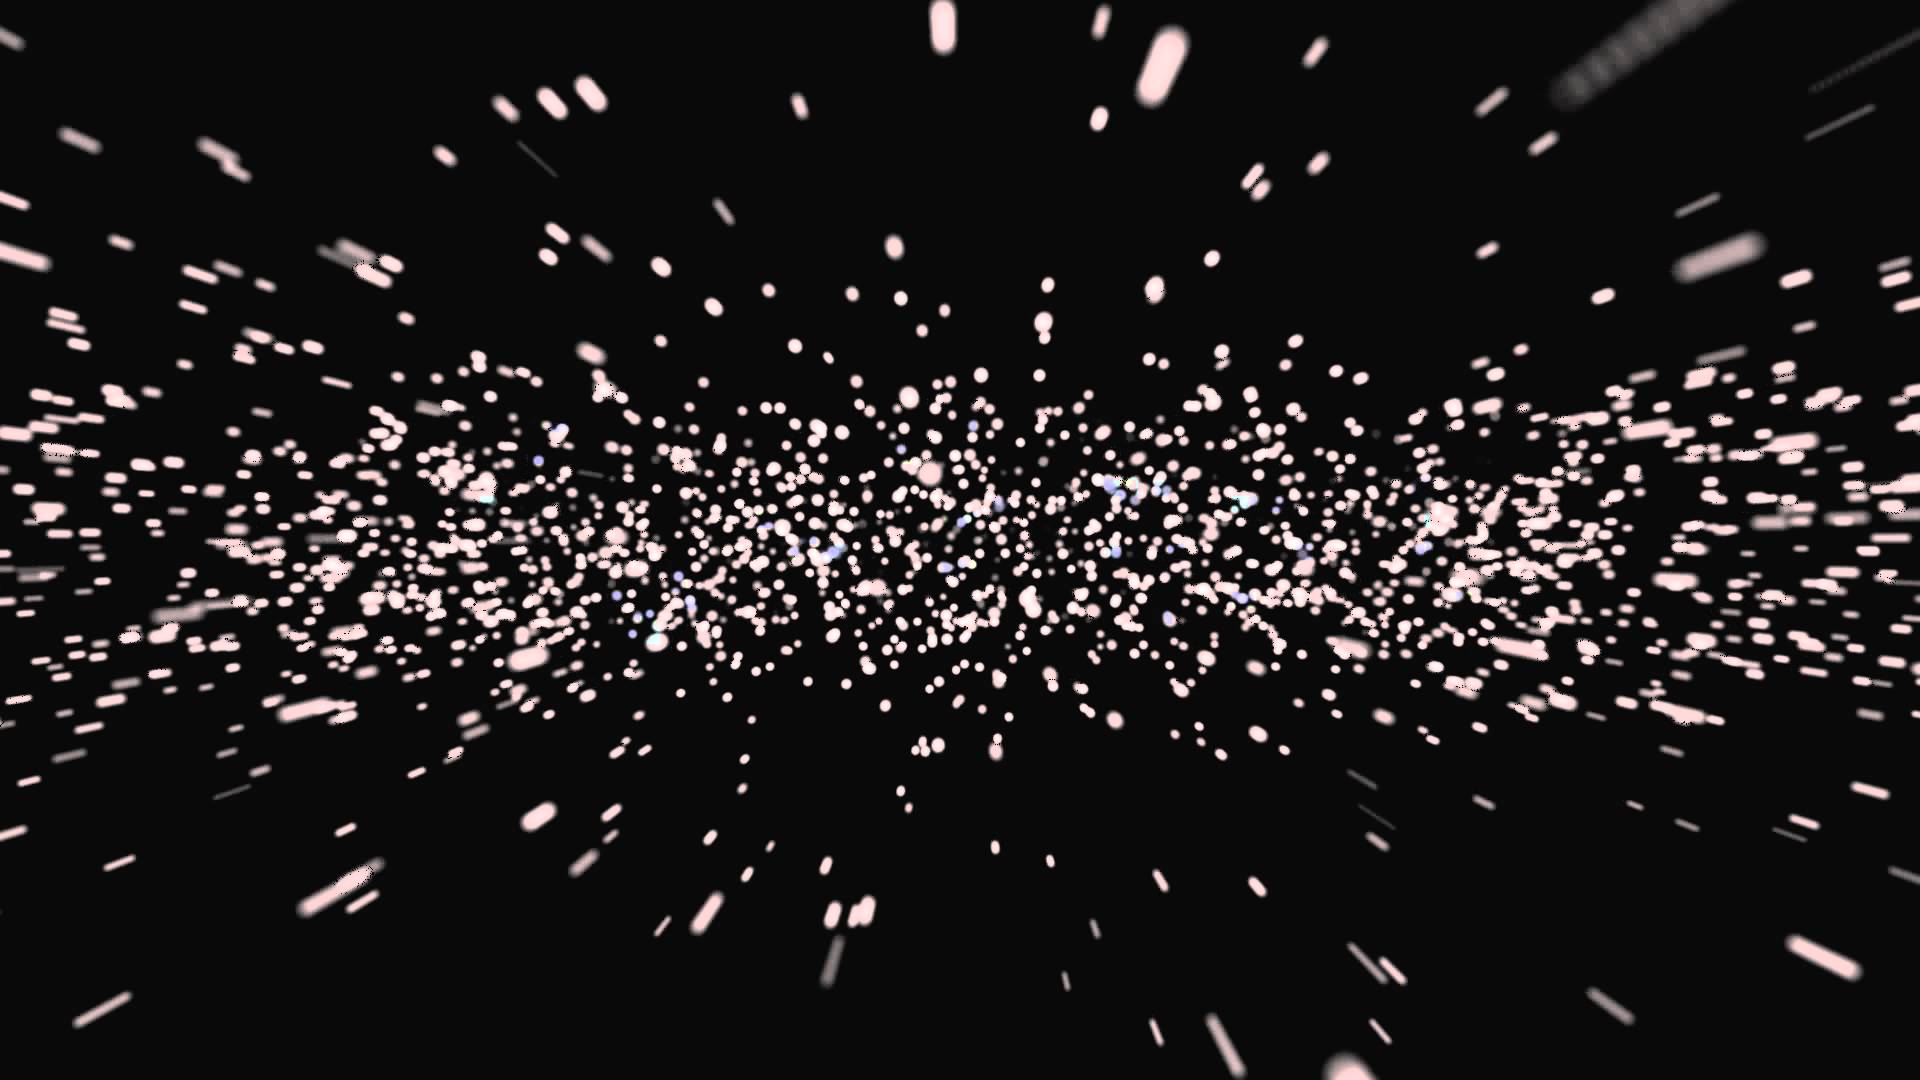 Flying Particles Overlay ( FREE ) - YouTube